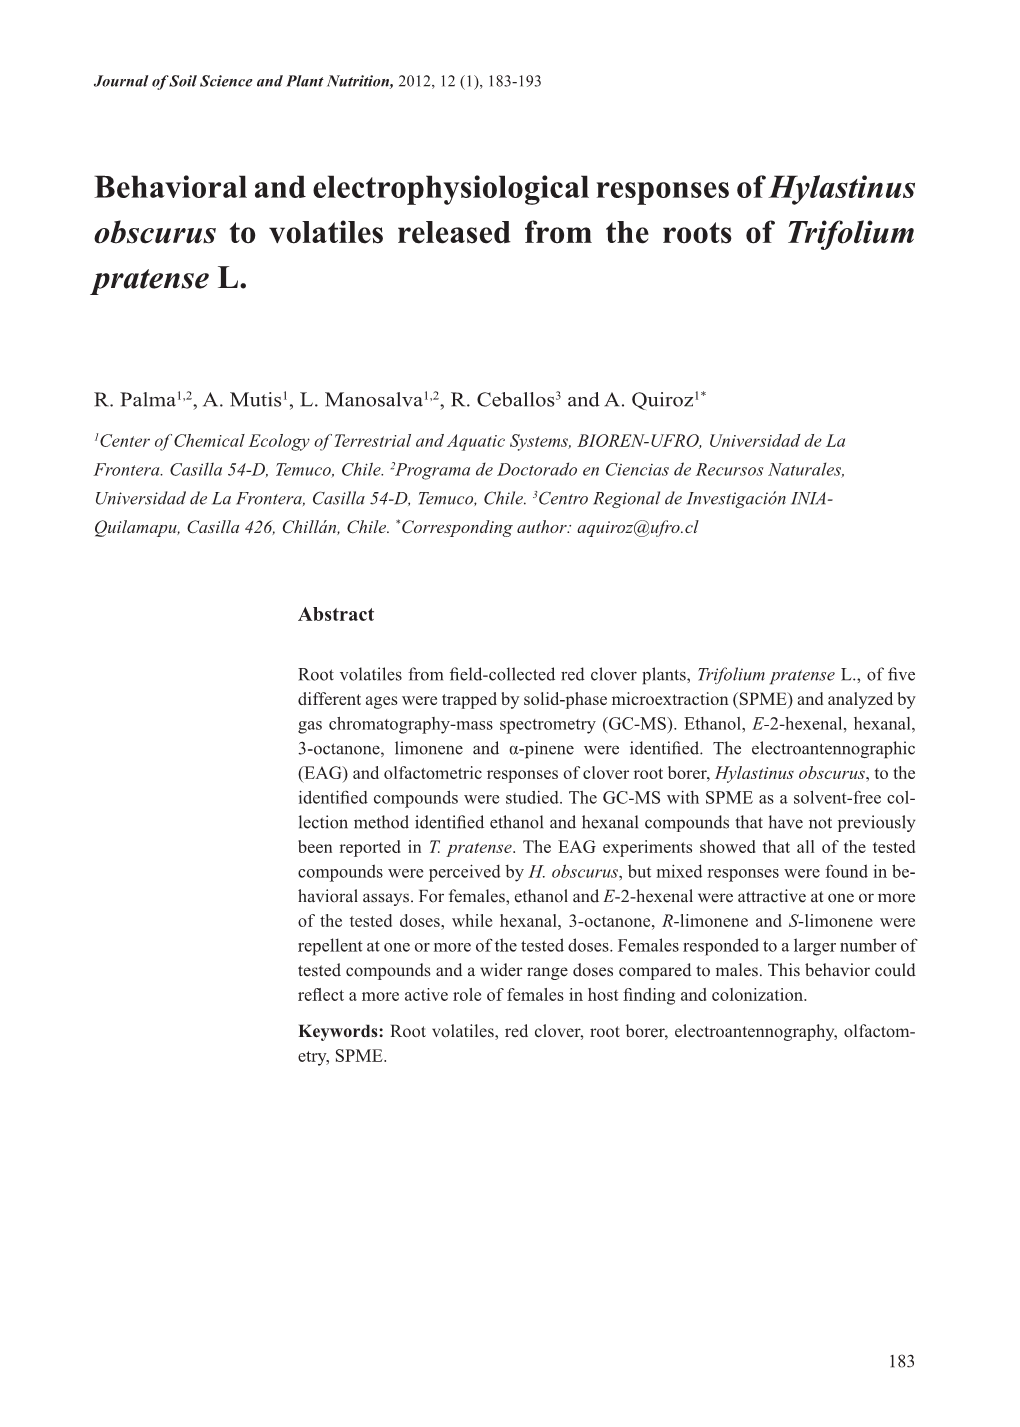 Behavioral and Electrophysiological Responses of Hylastinus Obscurus to Volatiles Released from the Roots of Trifolium Pratense L